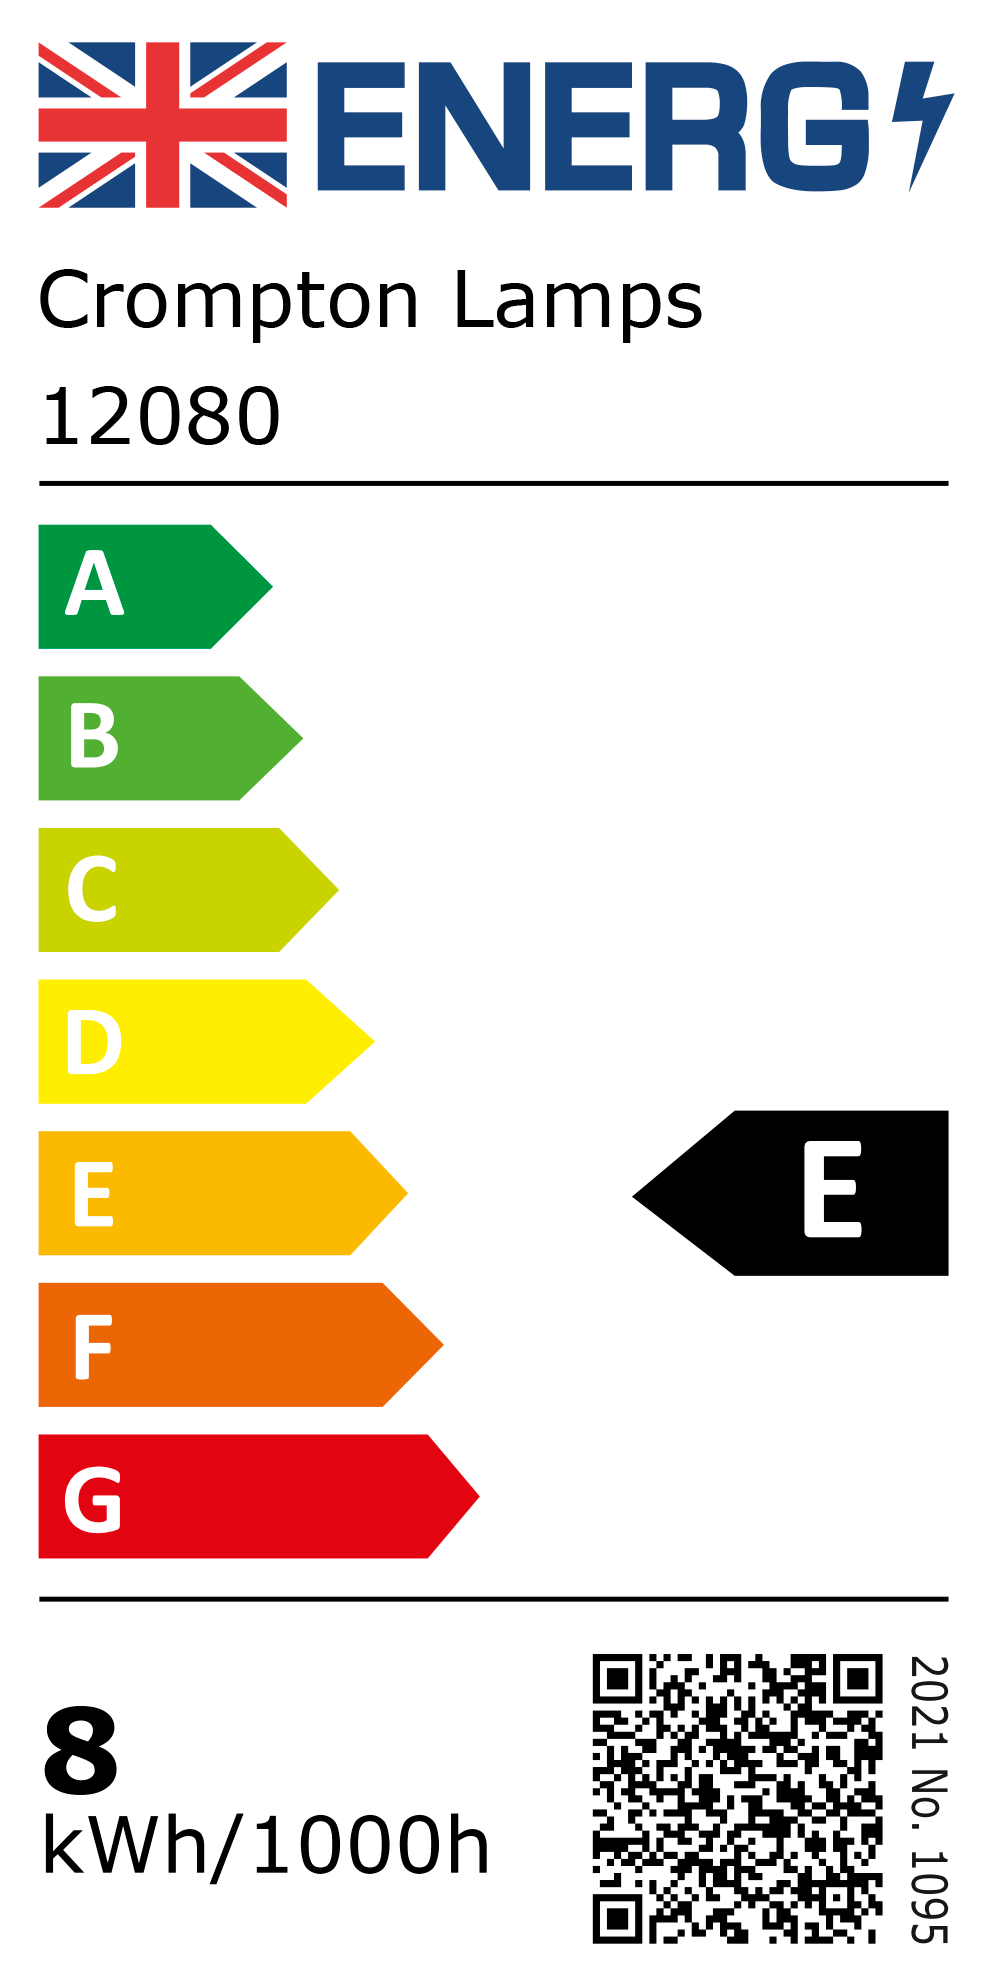 New 2021 Energy Rating Label: Stock Code 12080